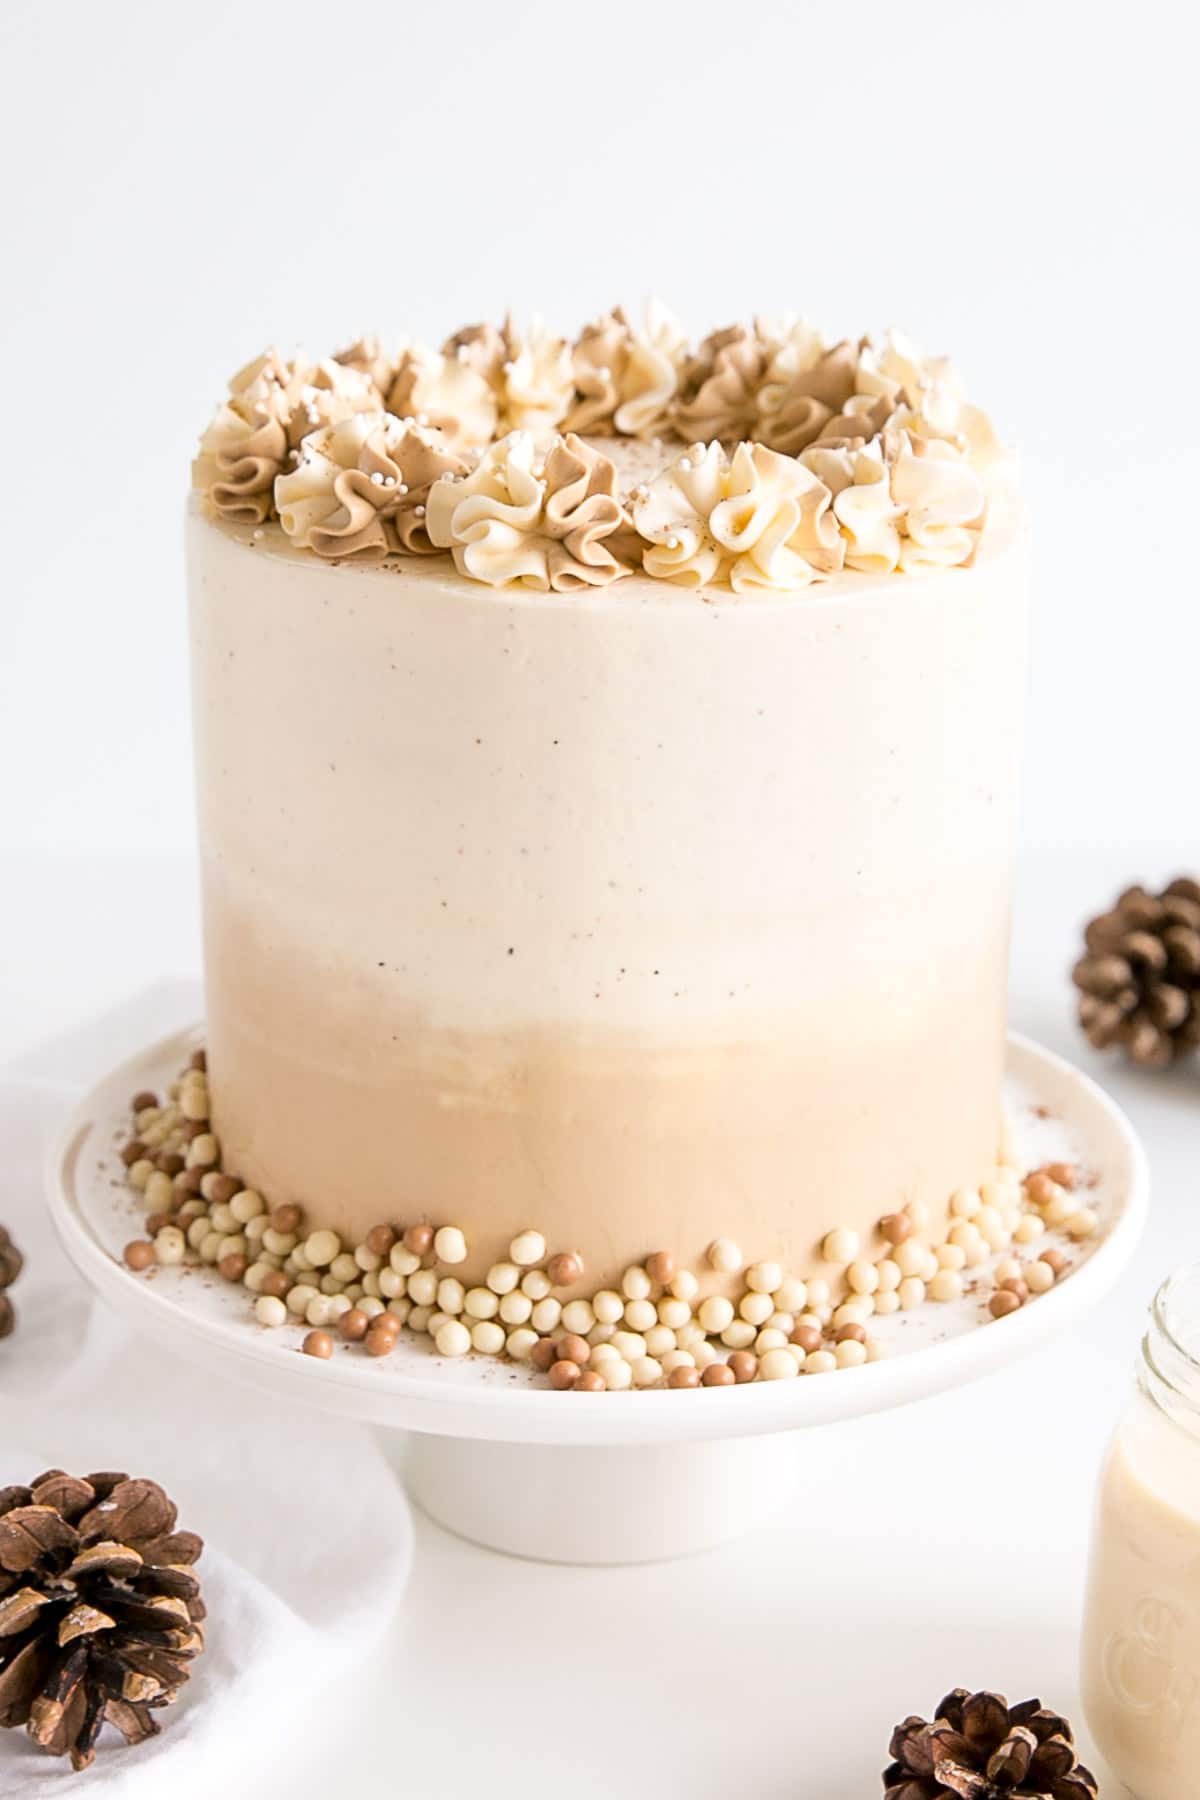 Slightly angled shot of the eggnog cake with pine cones in the foreground.